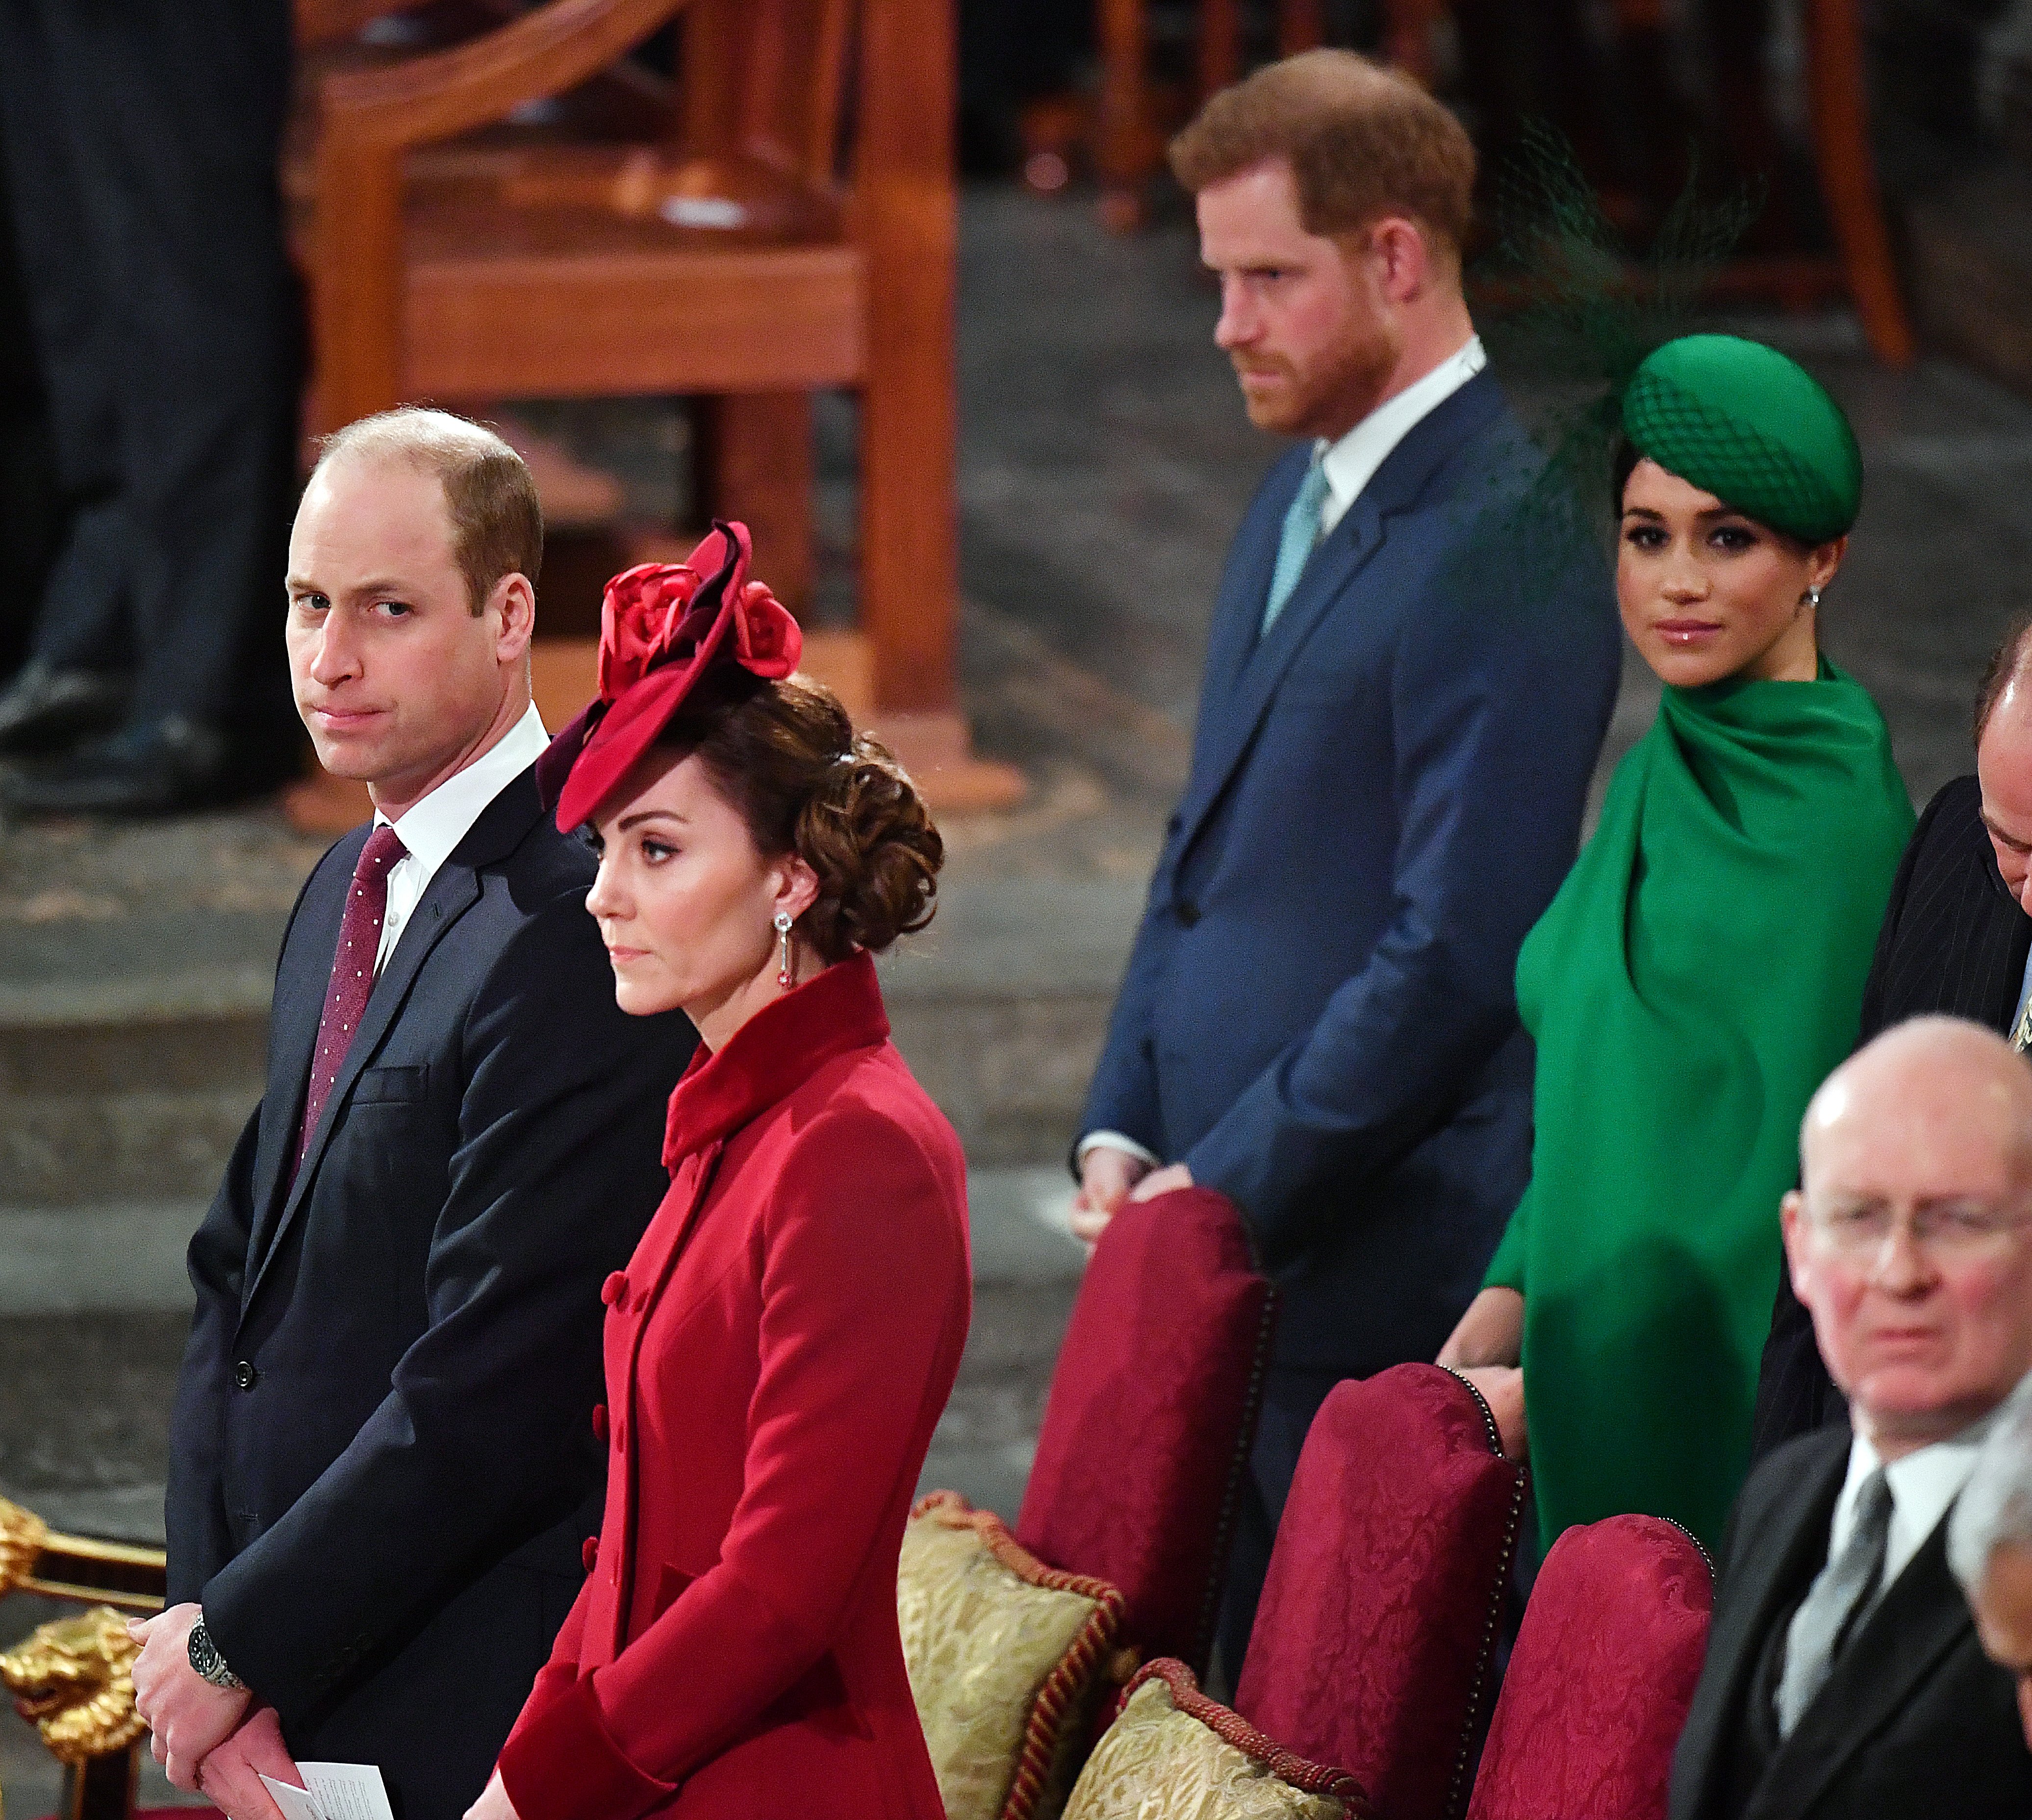 Prince William, Kate Middleton, Prince Harry, and Meghan Markle attend the Commonwealth Day Service 2020 on March 9, 2020 in London, England | Photo: Getty Images